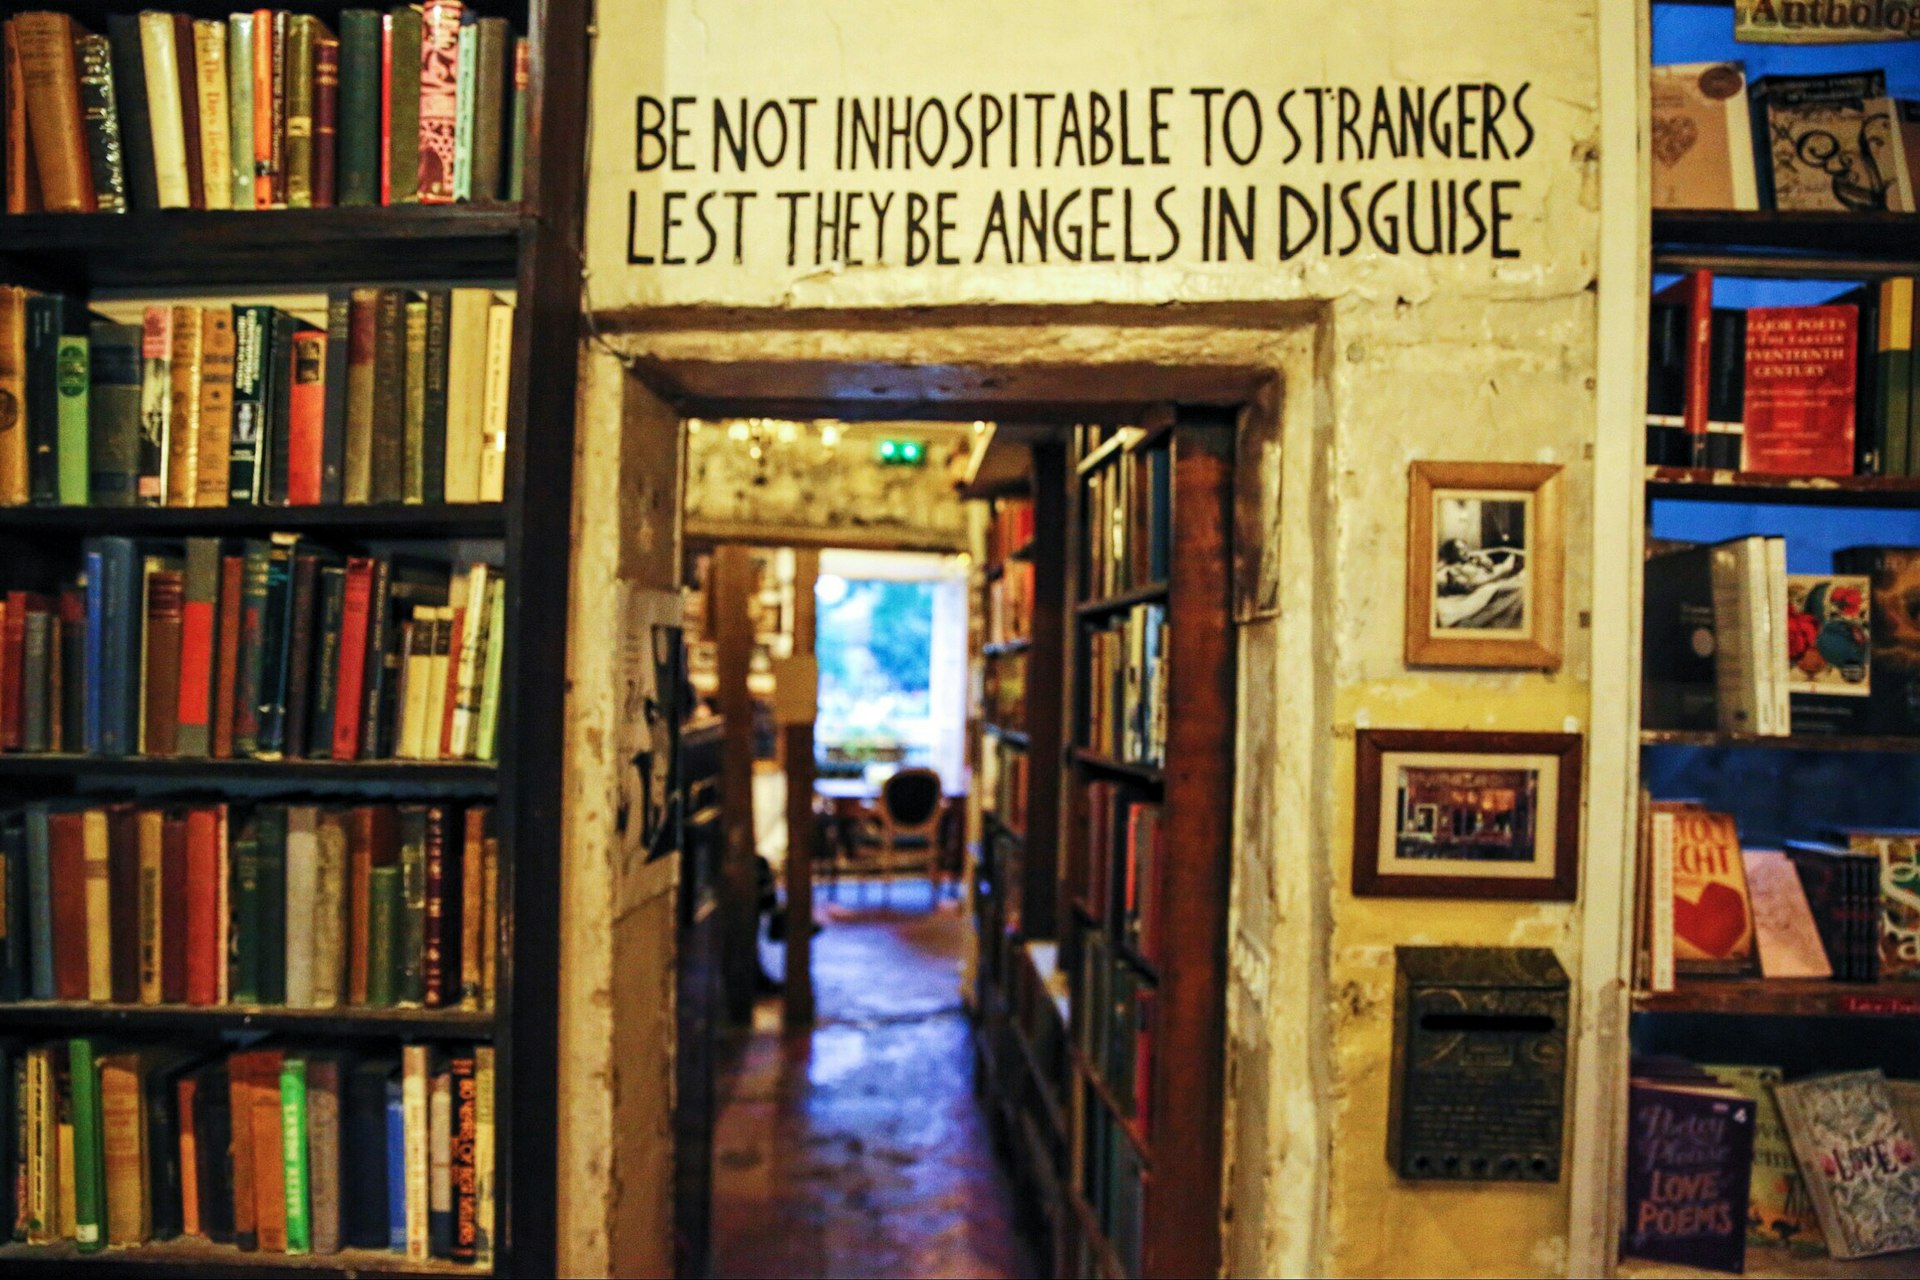 A motto reading "Be not inhospitable to strangers lest the be angels in disguise" painted above a doorway inside a bookshop